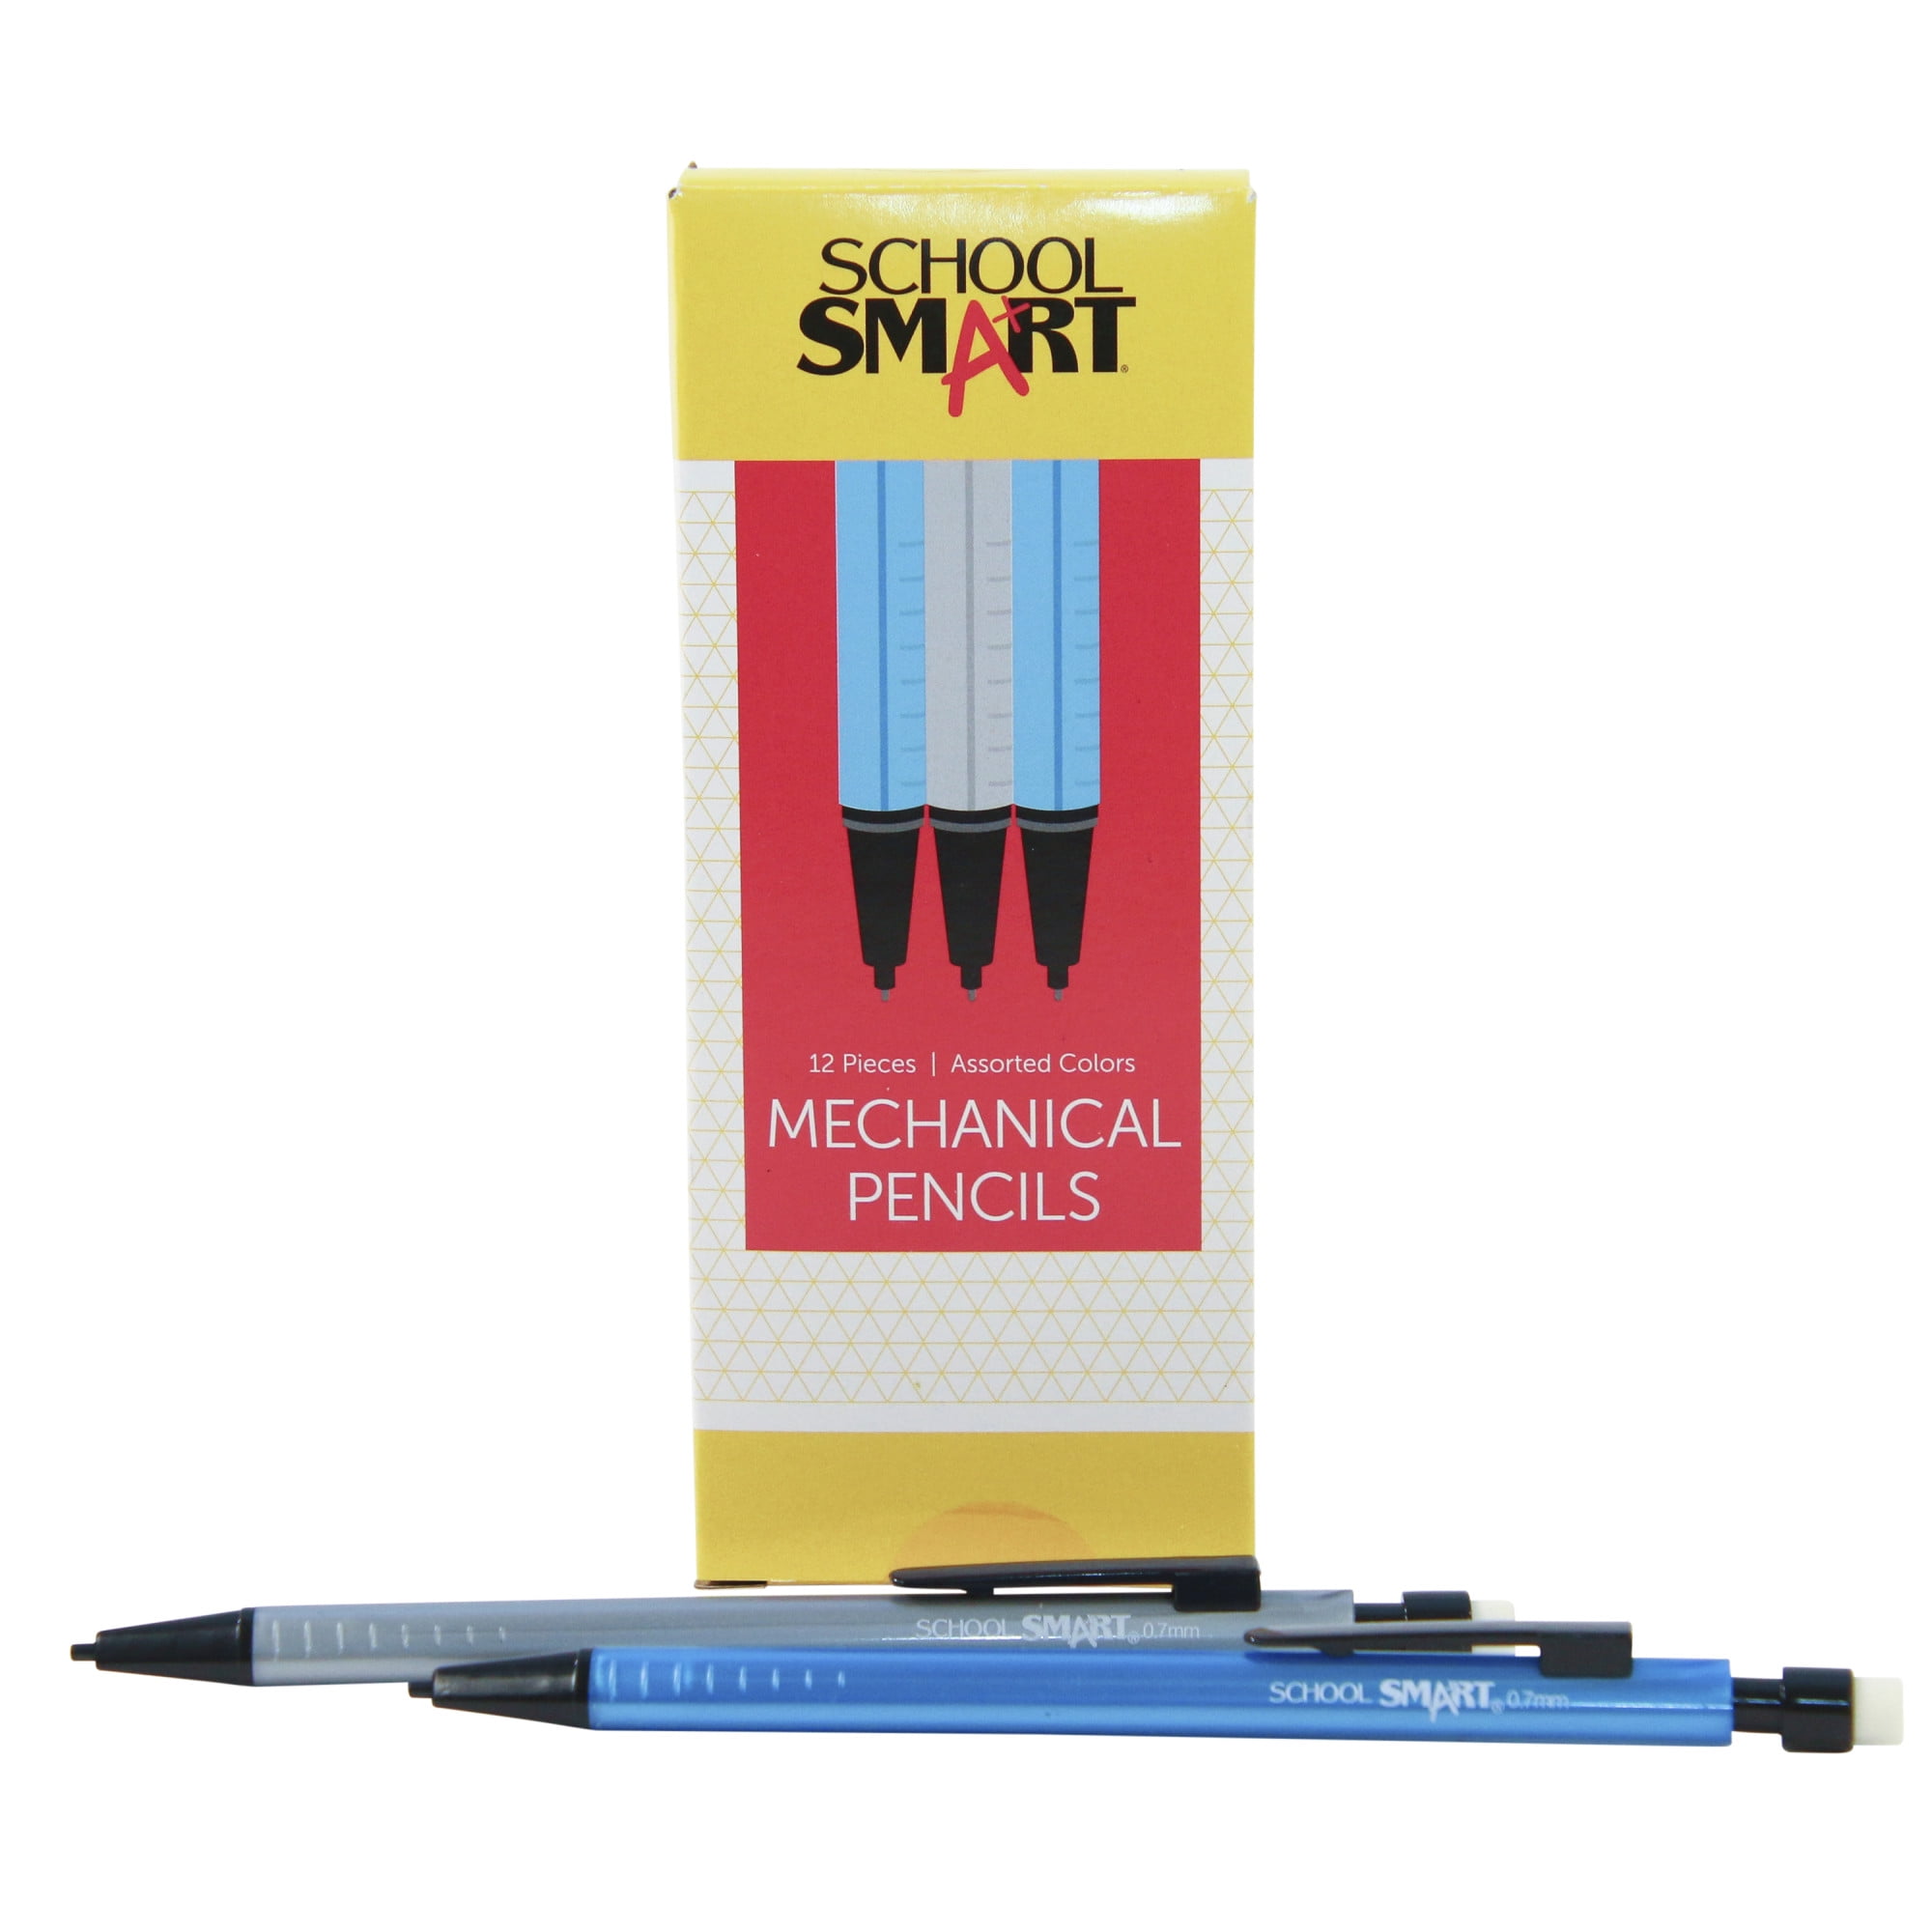 What is the difference between a No. 2 pencil and a mechanical